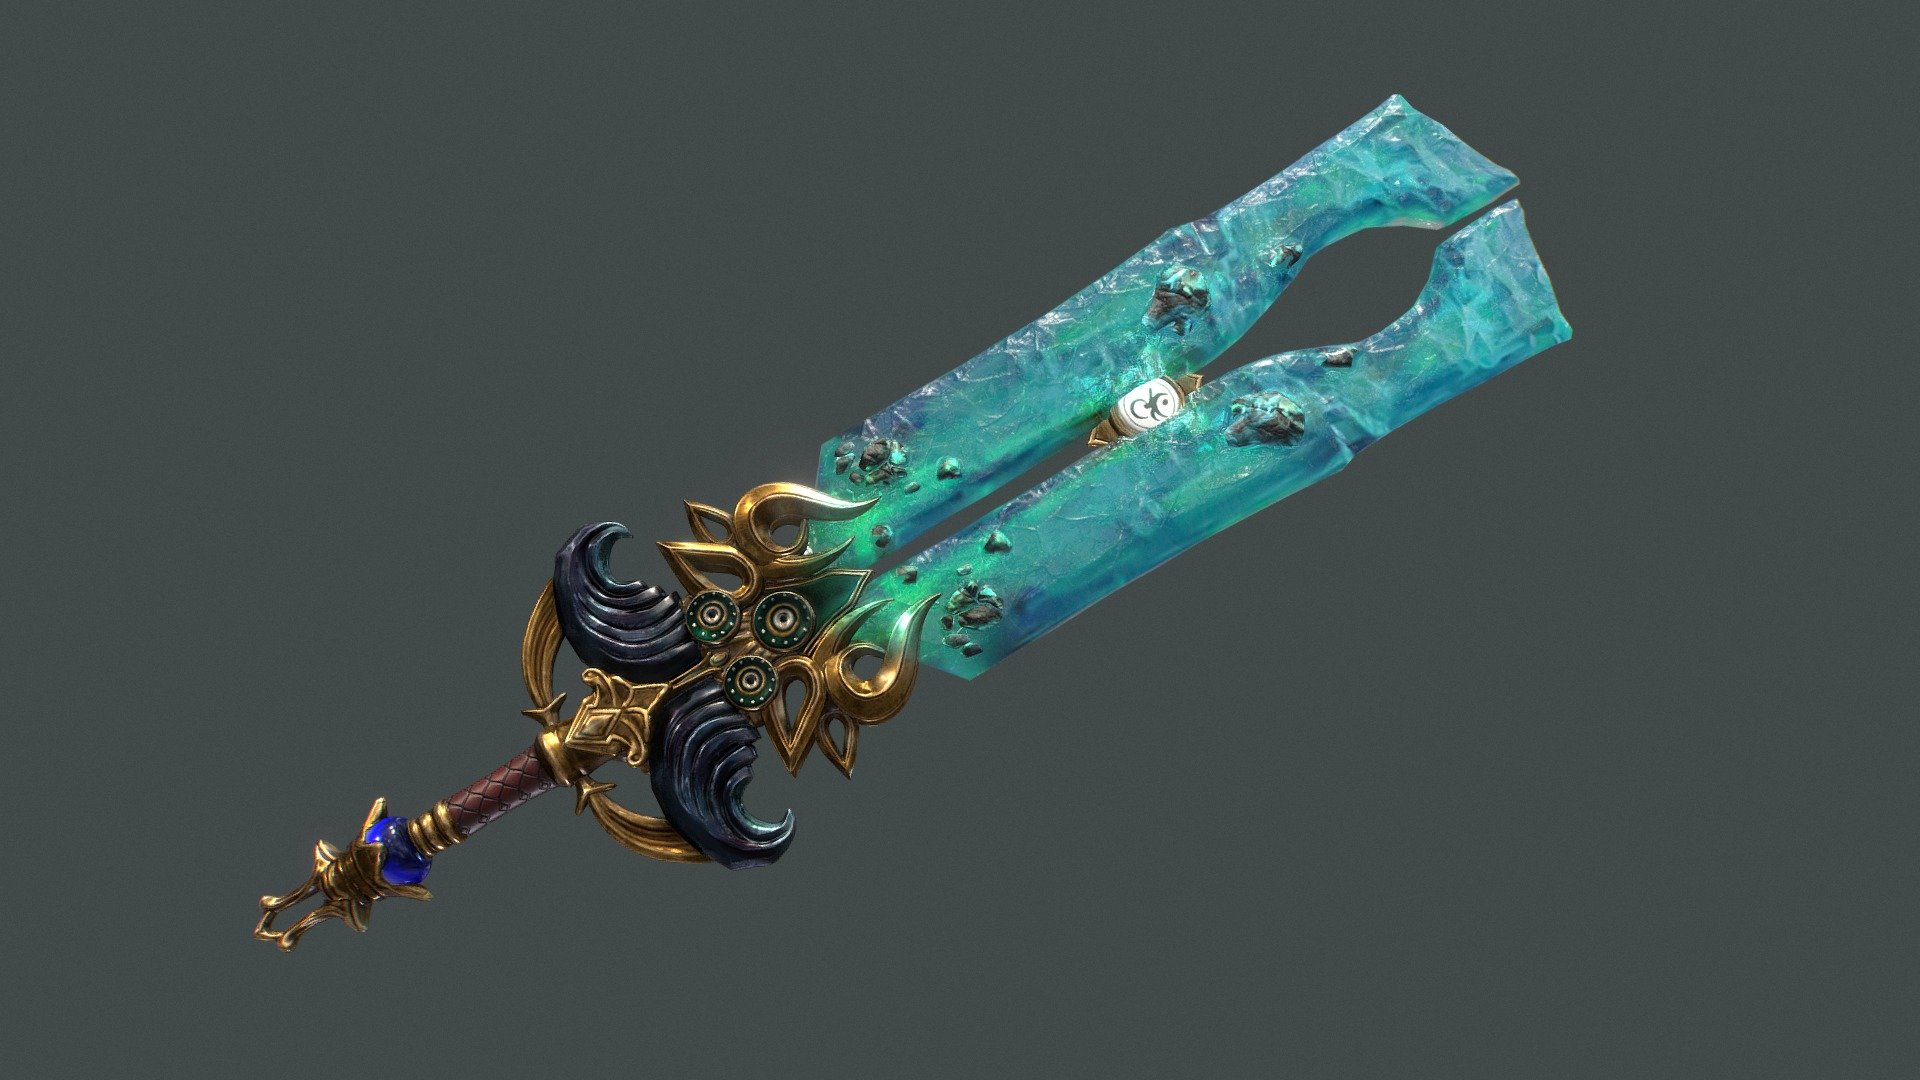 Crystal Sword I did for a comission
Check my artstation for more : 
https://www.artstation.com/artwork/w6EGVY
Sculpted with Zbrush
Retopology / modeling and Unwraping with Blender
Textured with Substance Painter - Crystal Sword - 3D model by Vincent Fondevila (@vincentfvs) 3d model